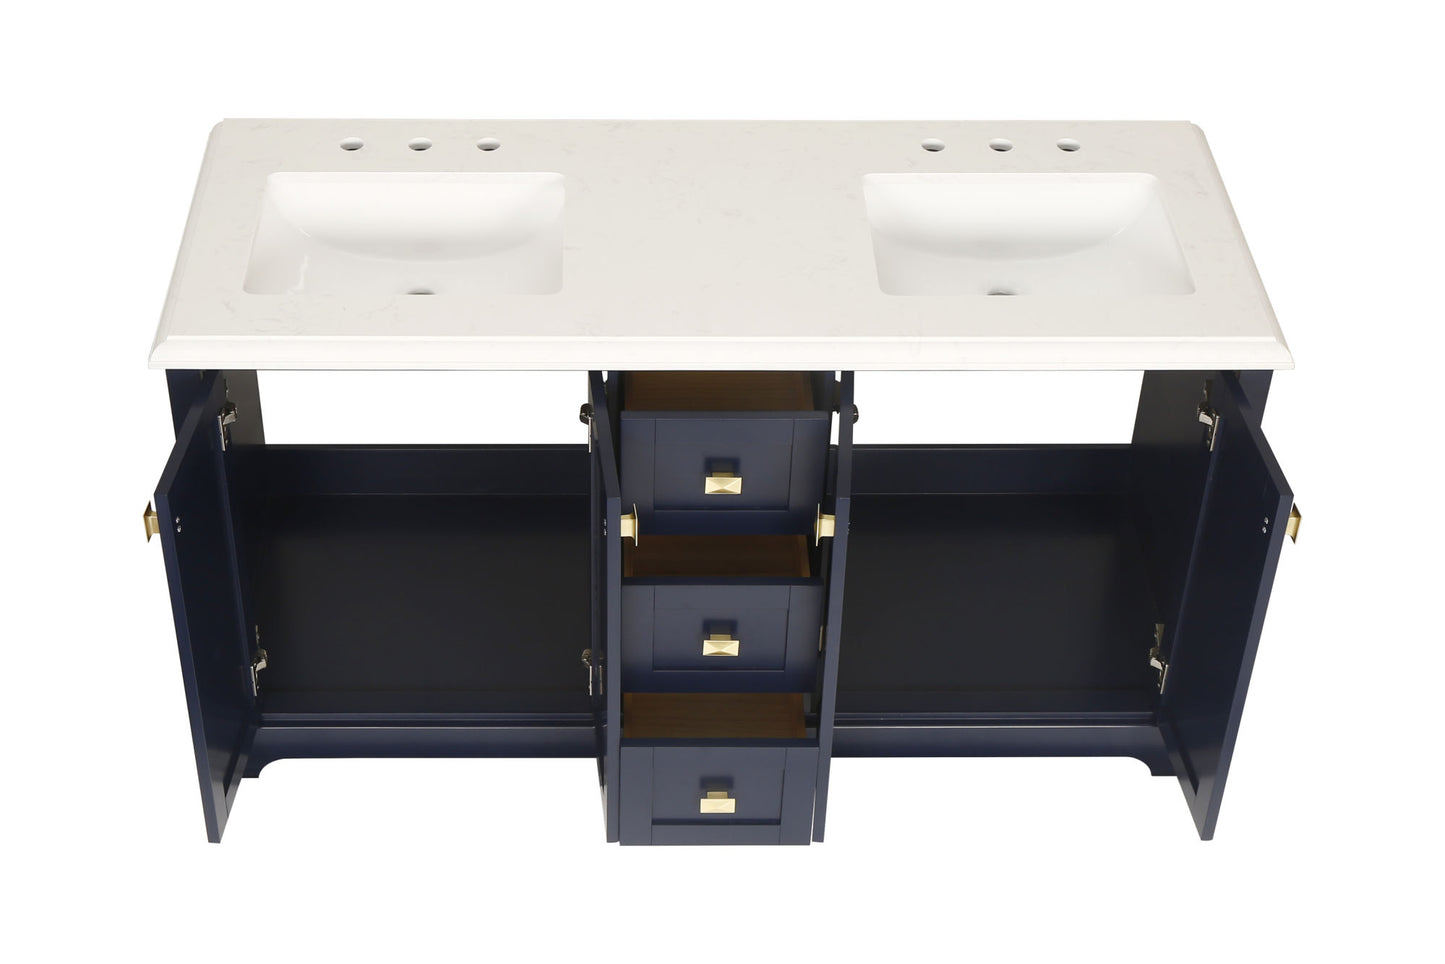 Vanity Sink Combo featuring a Marble Countertop, Bathroom Sink Cabinet, and Home Decor Bathroom Vanities - Fully Assembled Blue 60-inch Vanity with Sink 23V02-60NB